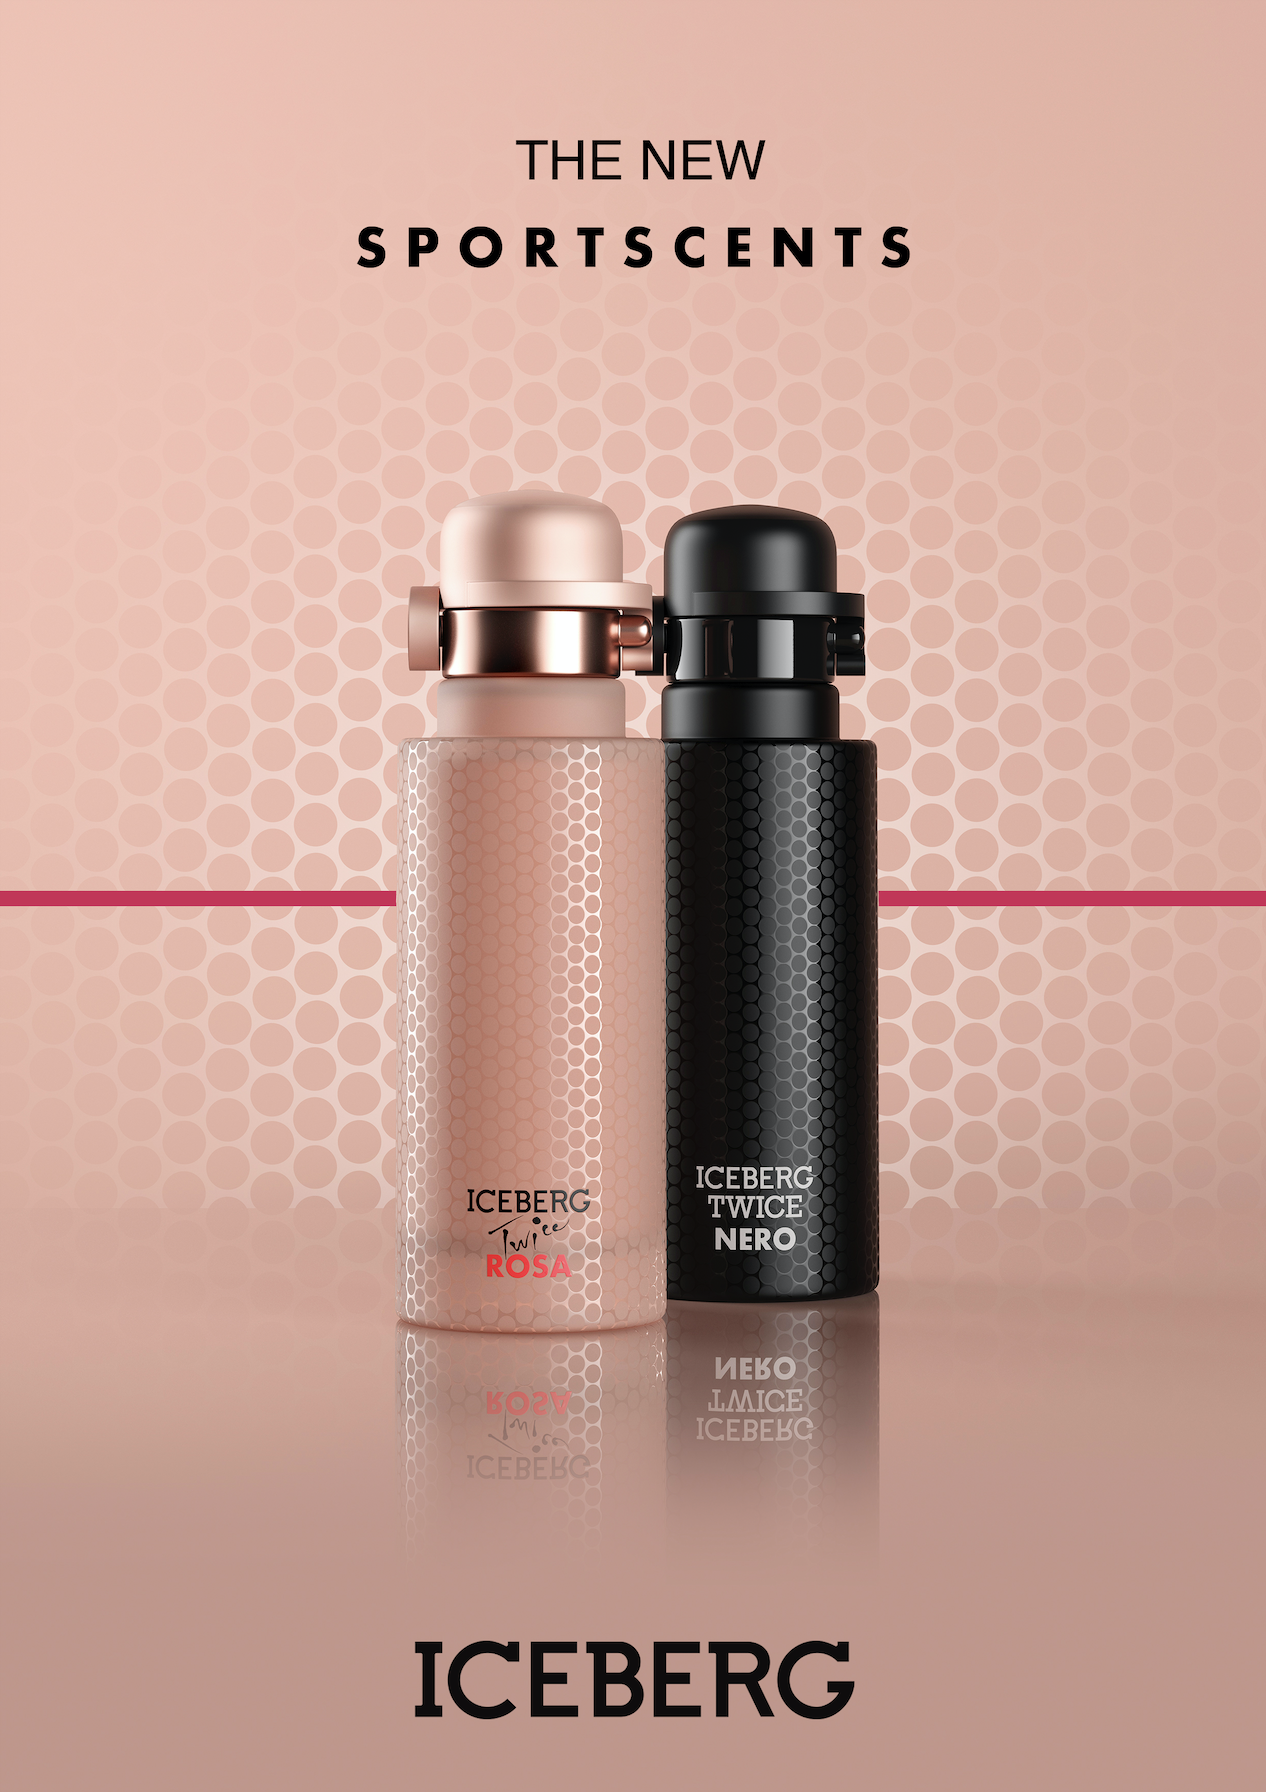 Twice Nero New Rosa Iceberg: ~ Fragrances by Sportscents and New